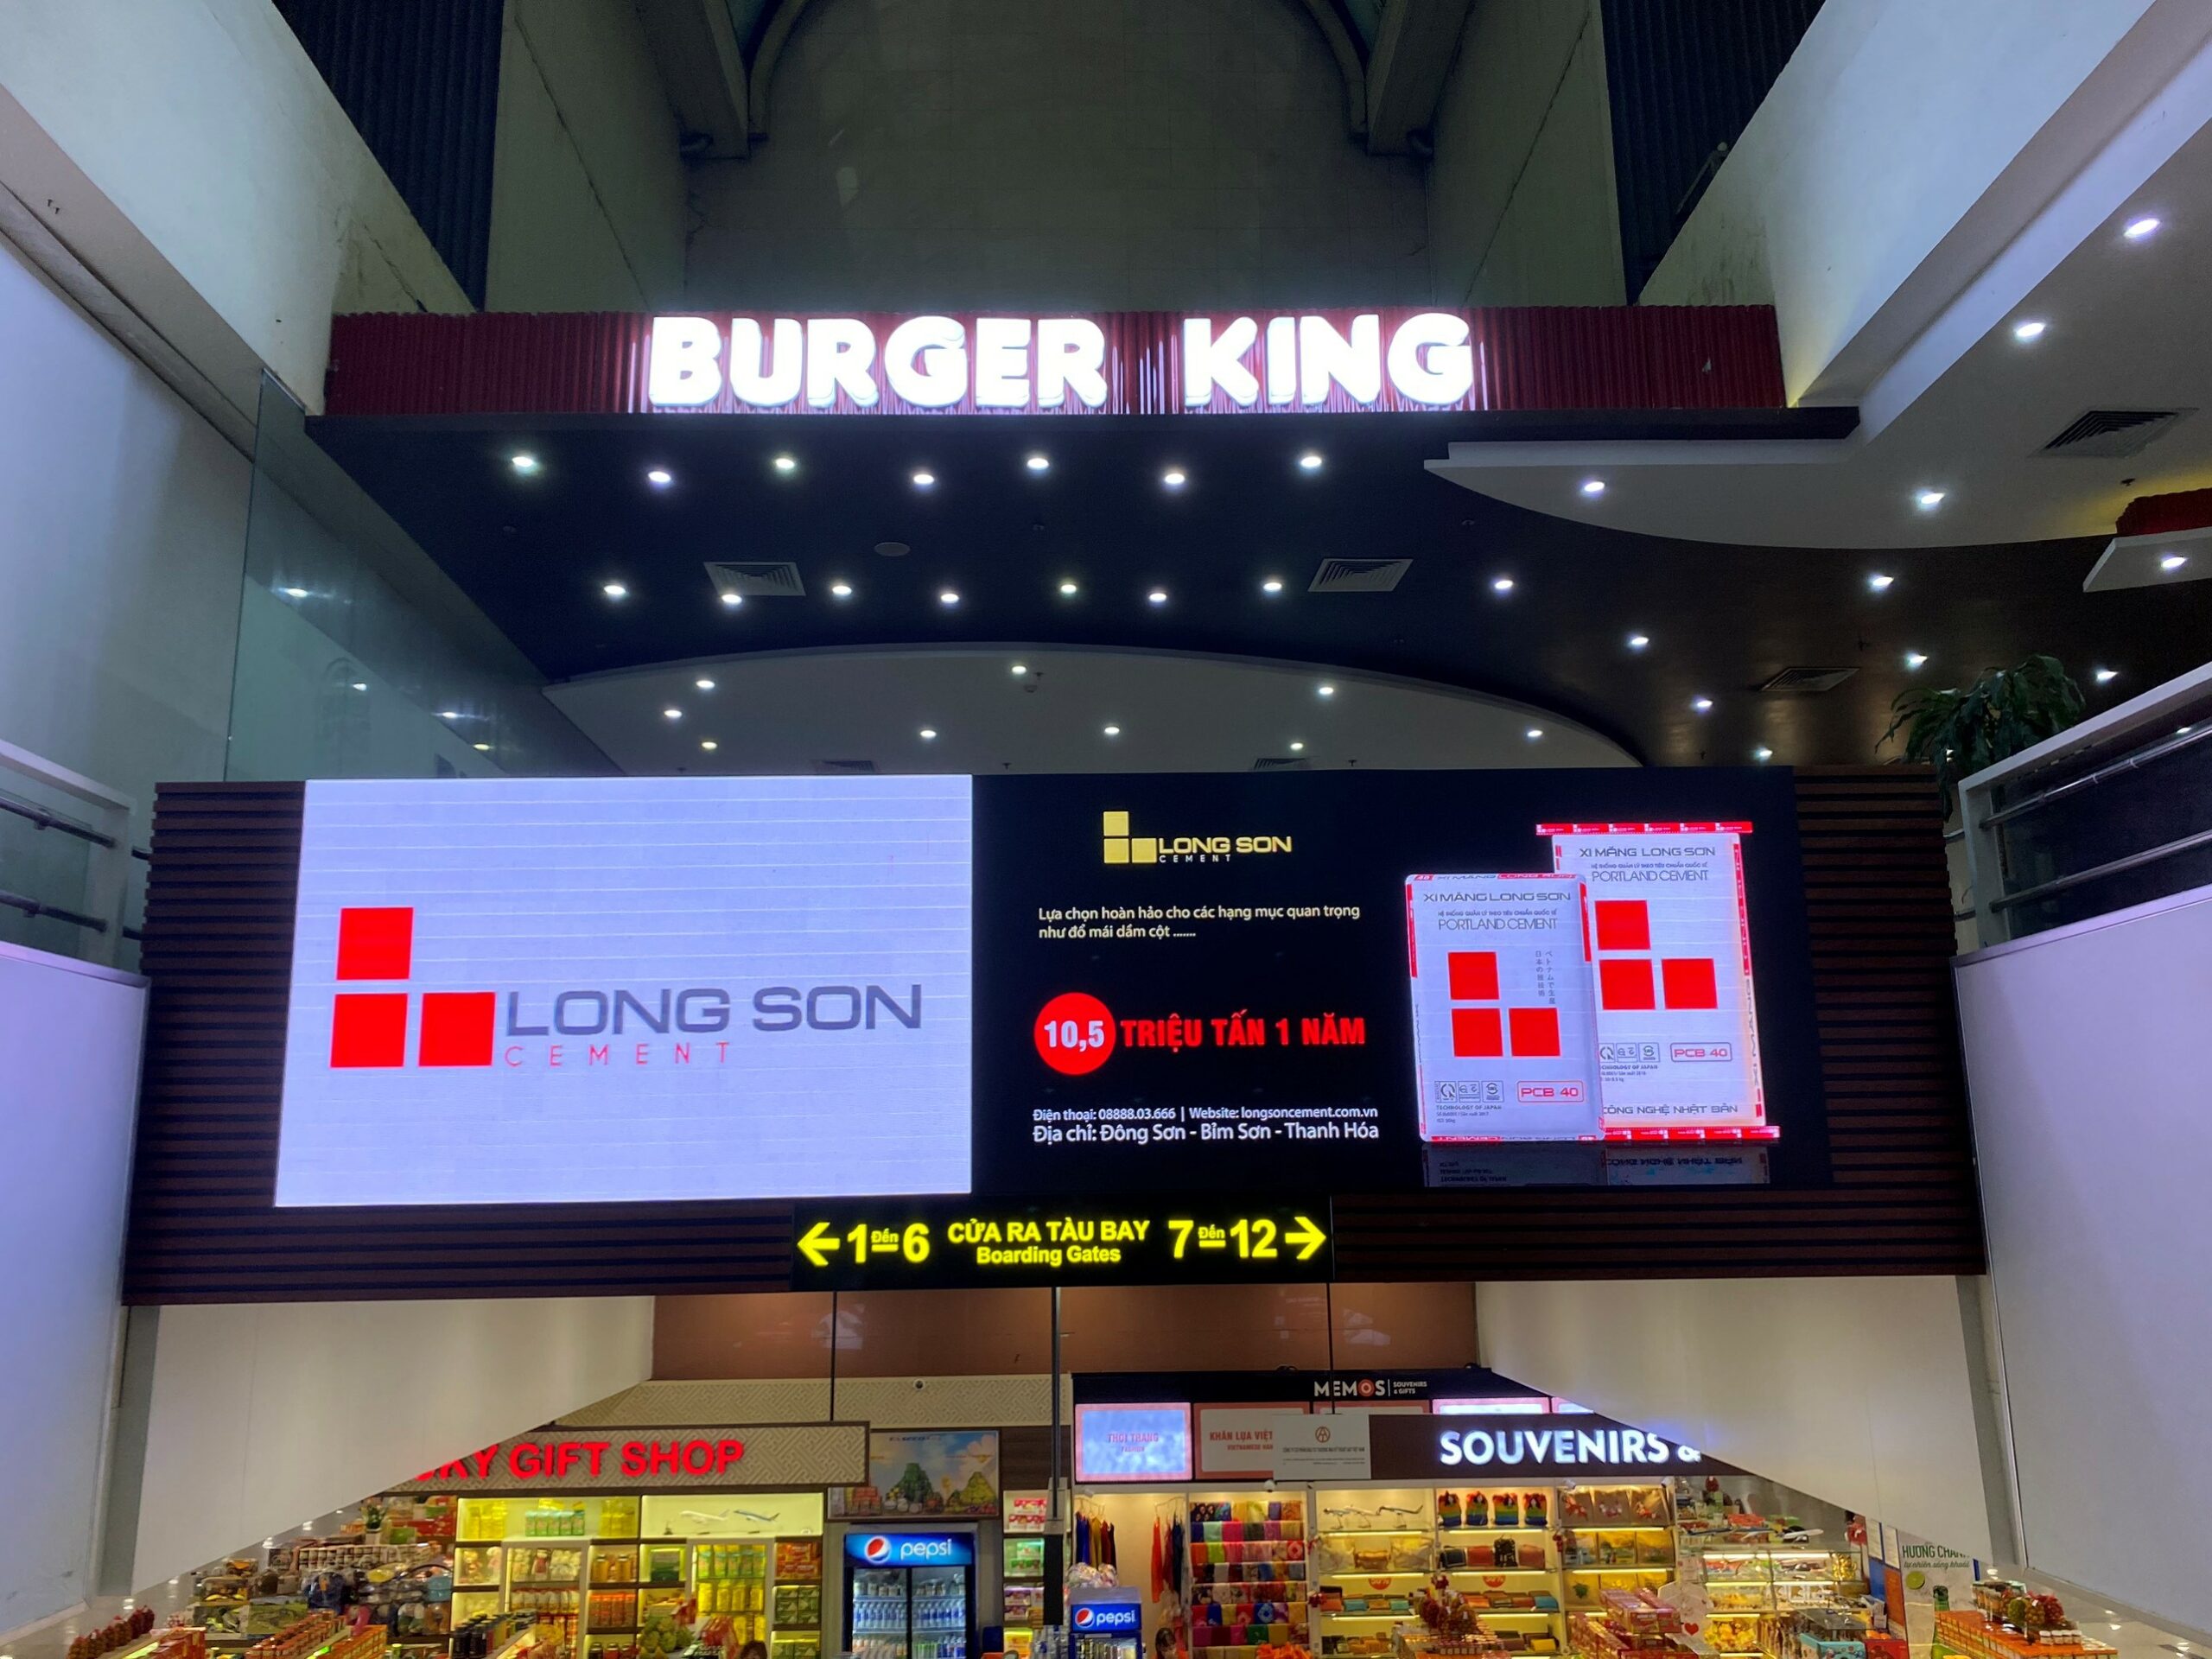 LED screen advertising at the airport